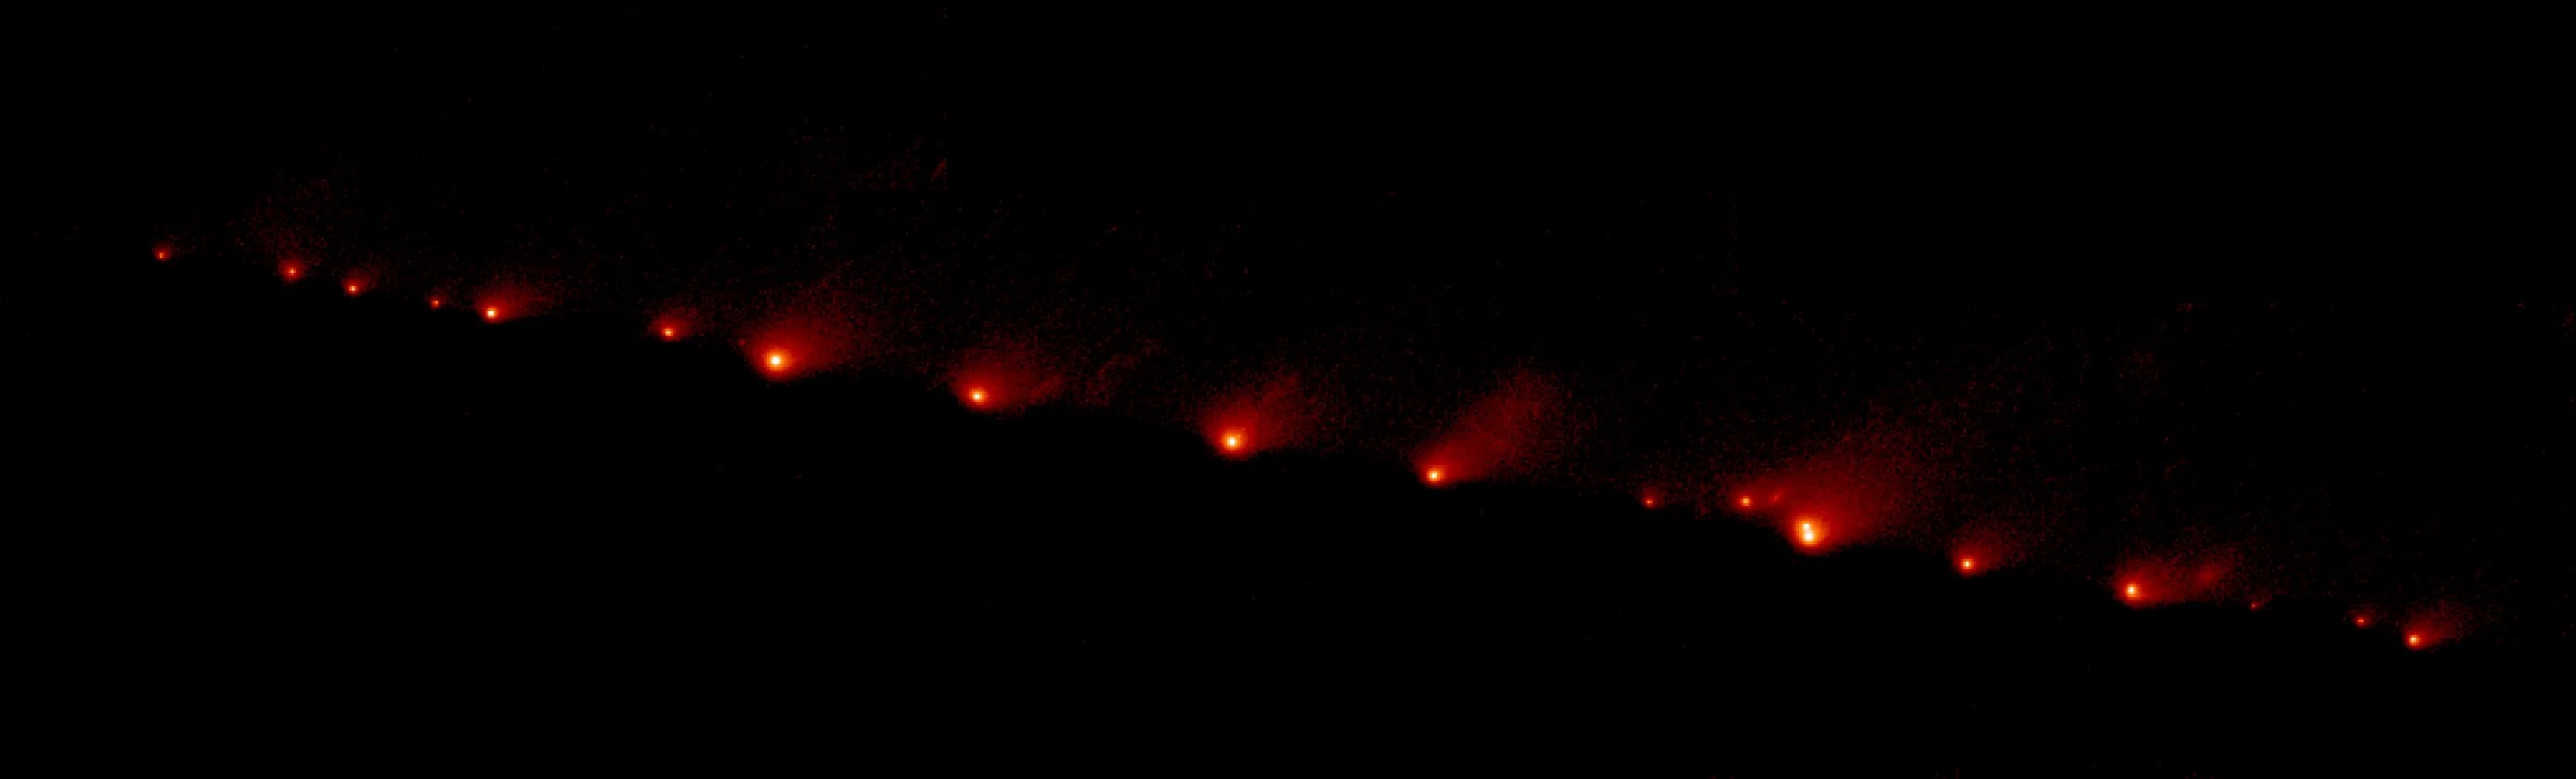 21 blazing fragments of Comet Shoemaker-Levy 9, seen as dark red glints of light against black space.